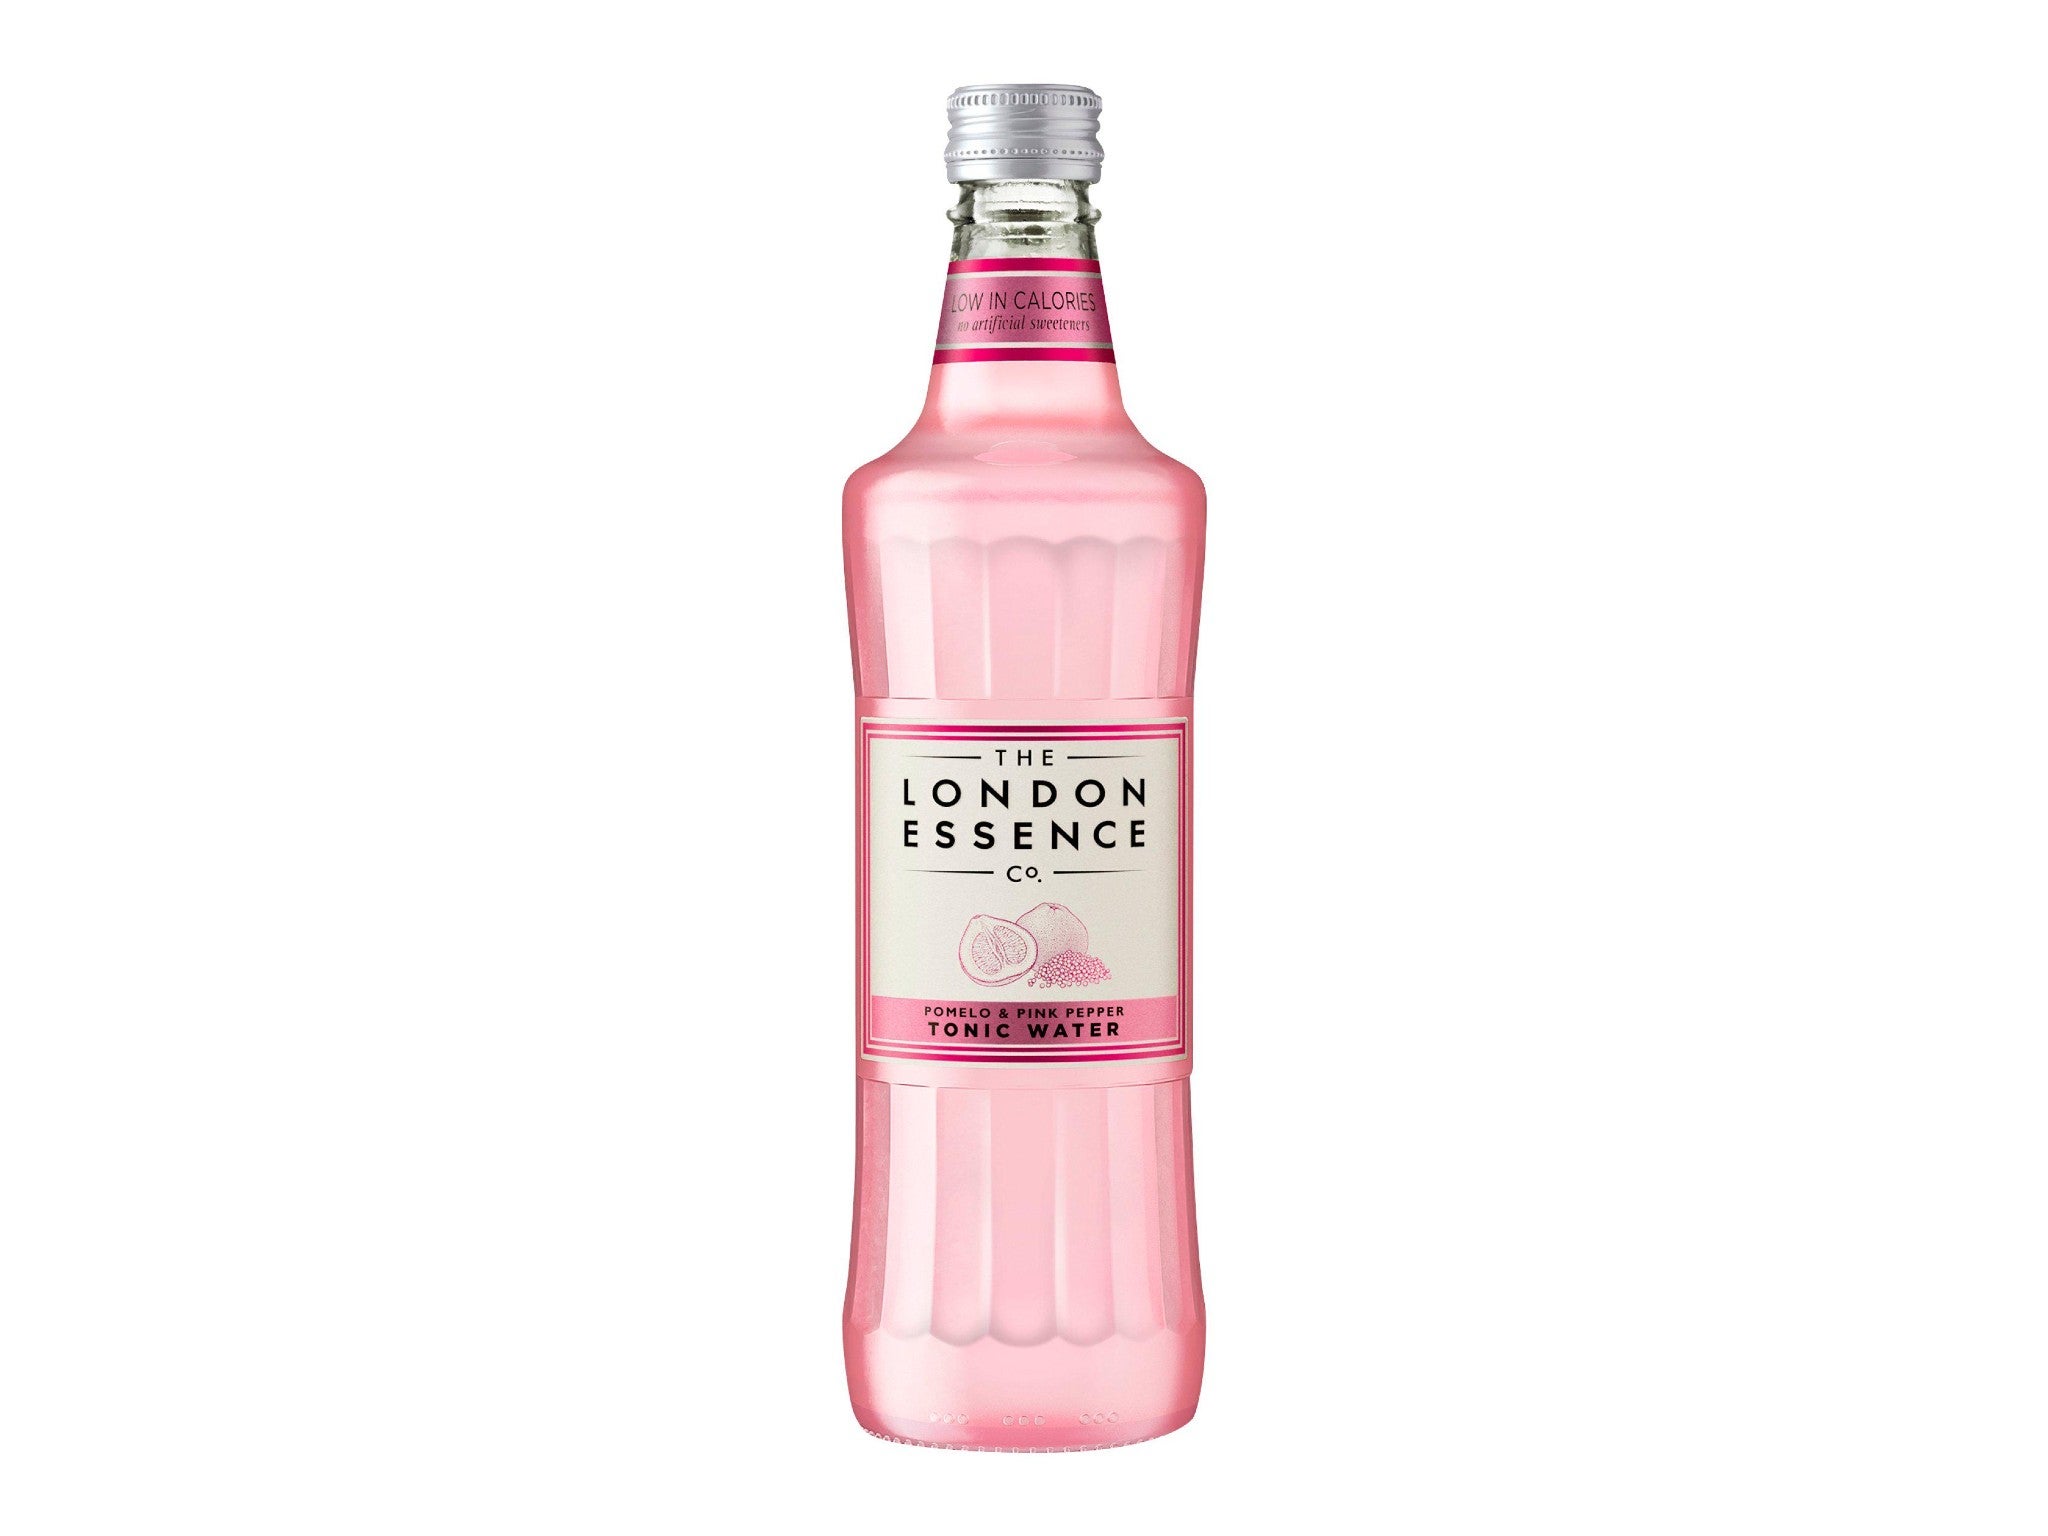 The London Essence pomelo & pink pepper tonic, 500ml indybest.jpeg